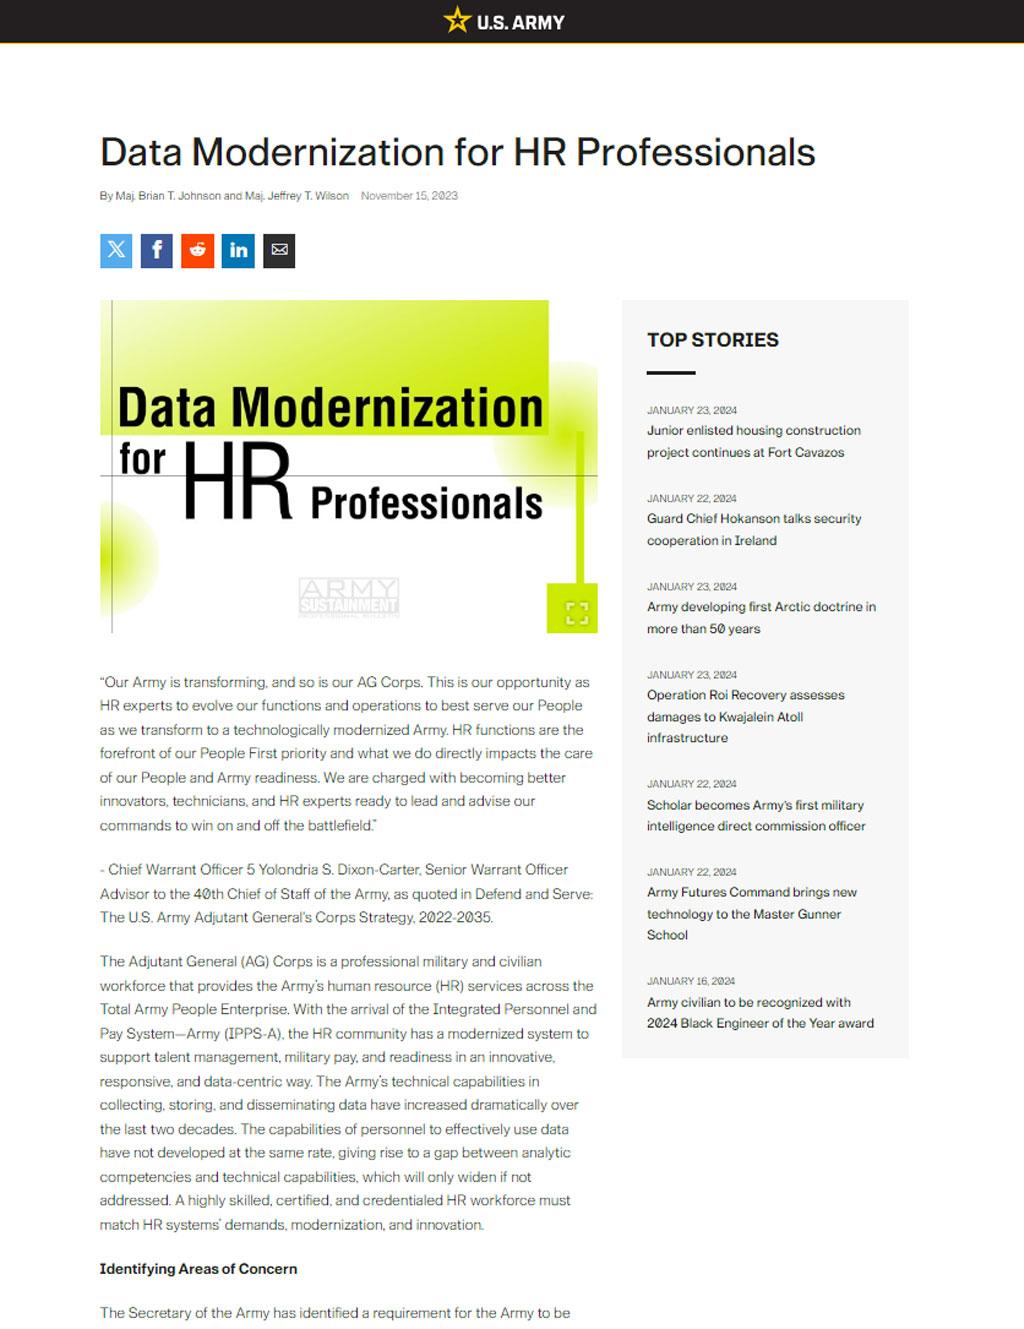 The image shows an article from the U.S. Army website dated November 15, 2023, titled Data Modernization for HR Professionals. The page includes social media sharing icons, an image with the title, a snippet of the article discussing the transformation of HR functions within the Army, and a sidebar featuring Top Stories related to the U.S. Army.